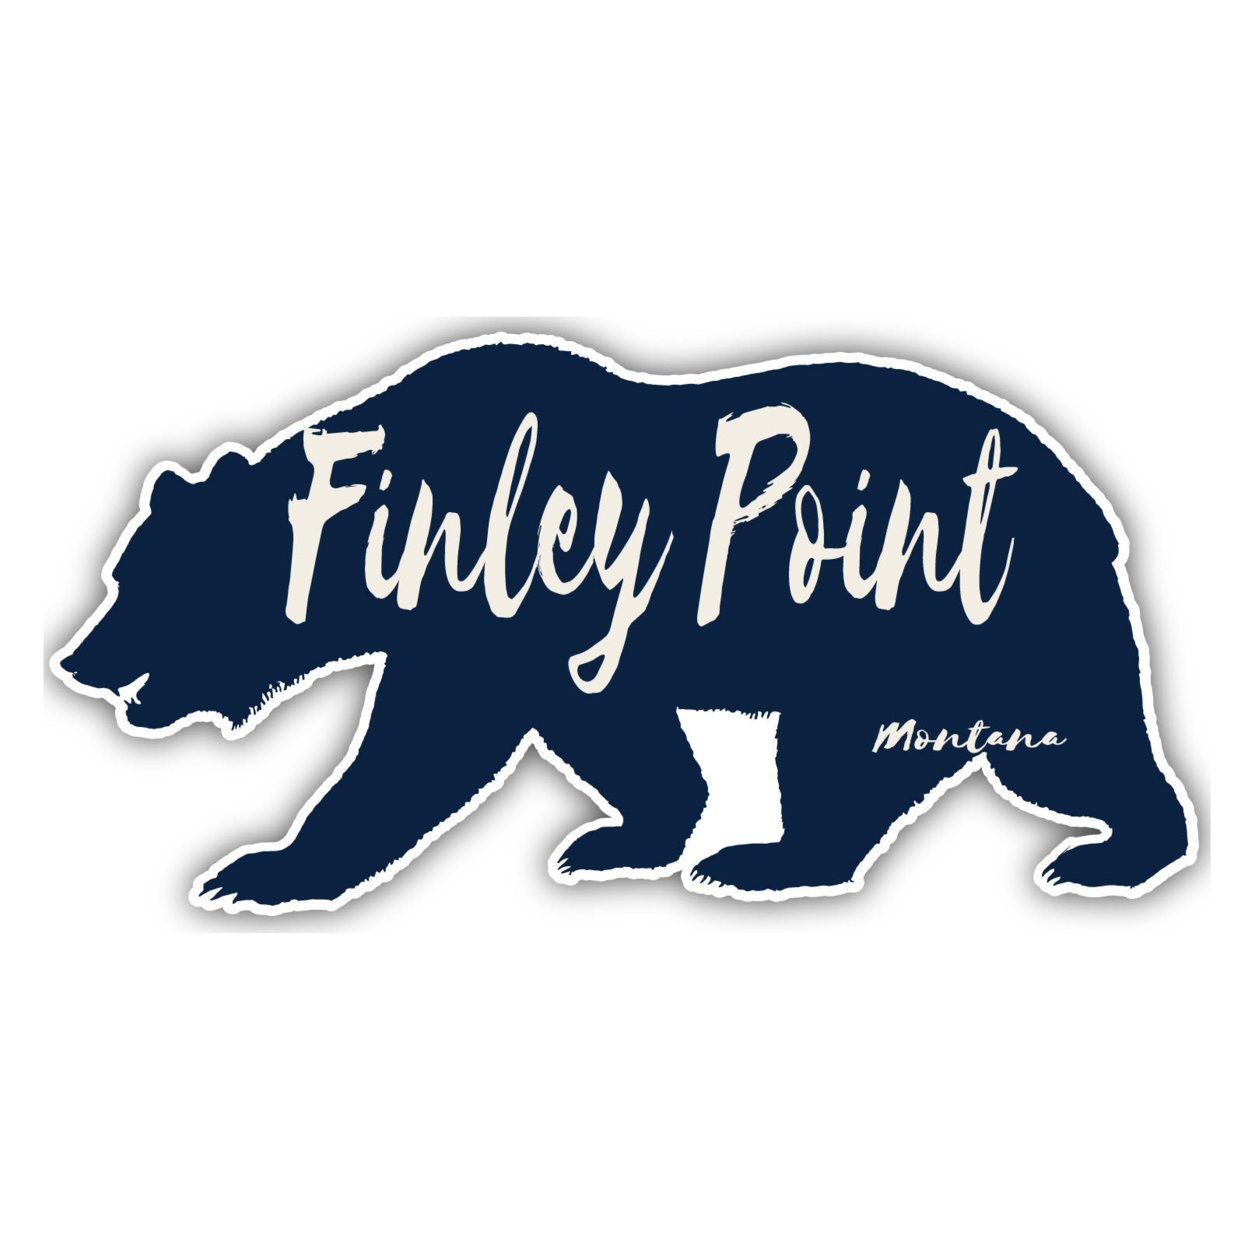 Finley Point Montana Souvenir Decorative Stickers (Choose Theme And Size) - 4-Pack, 6-Inch, Bear